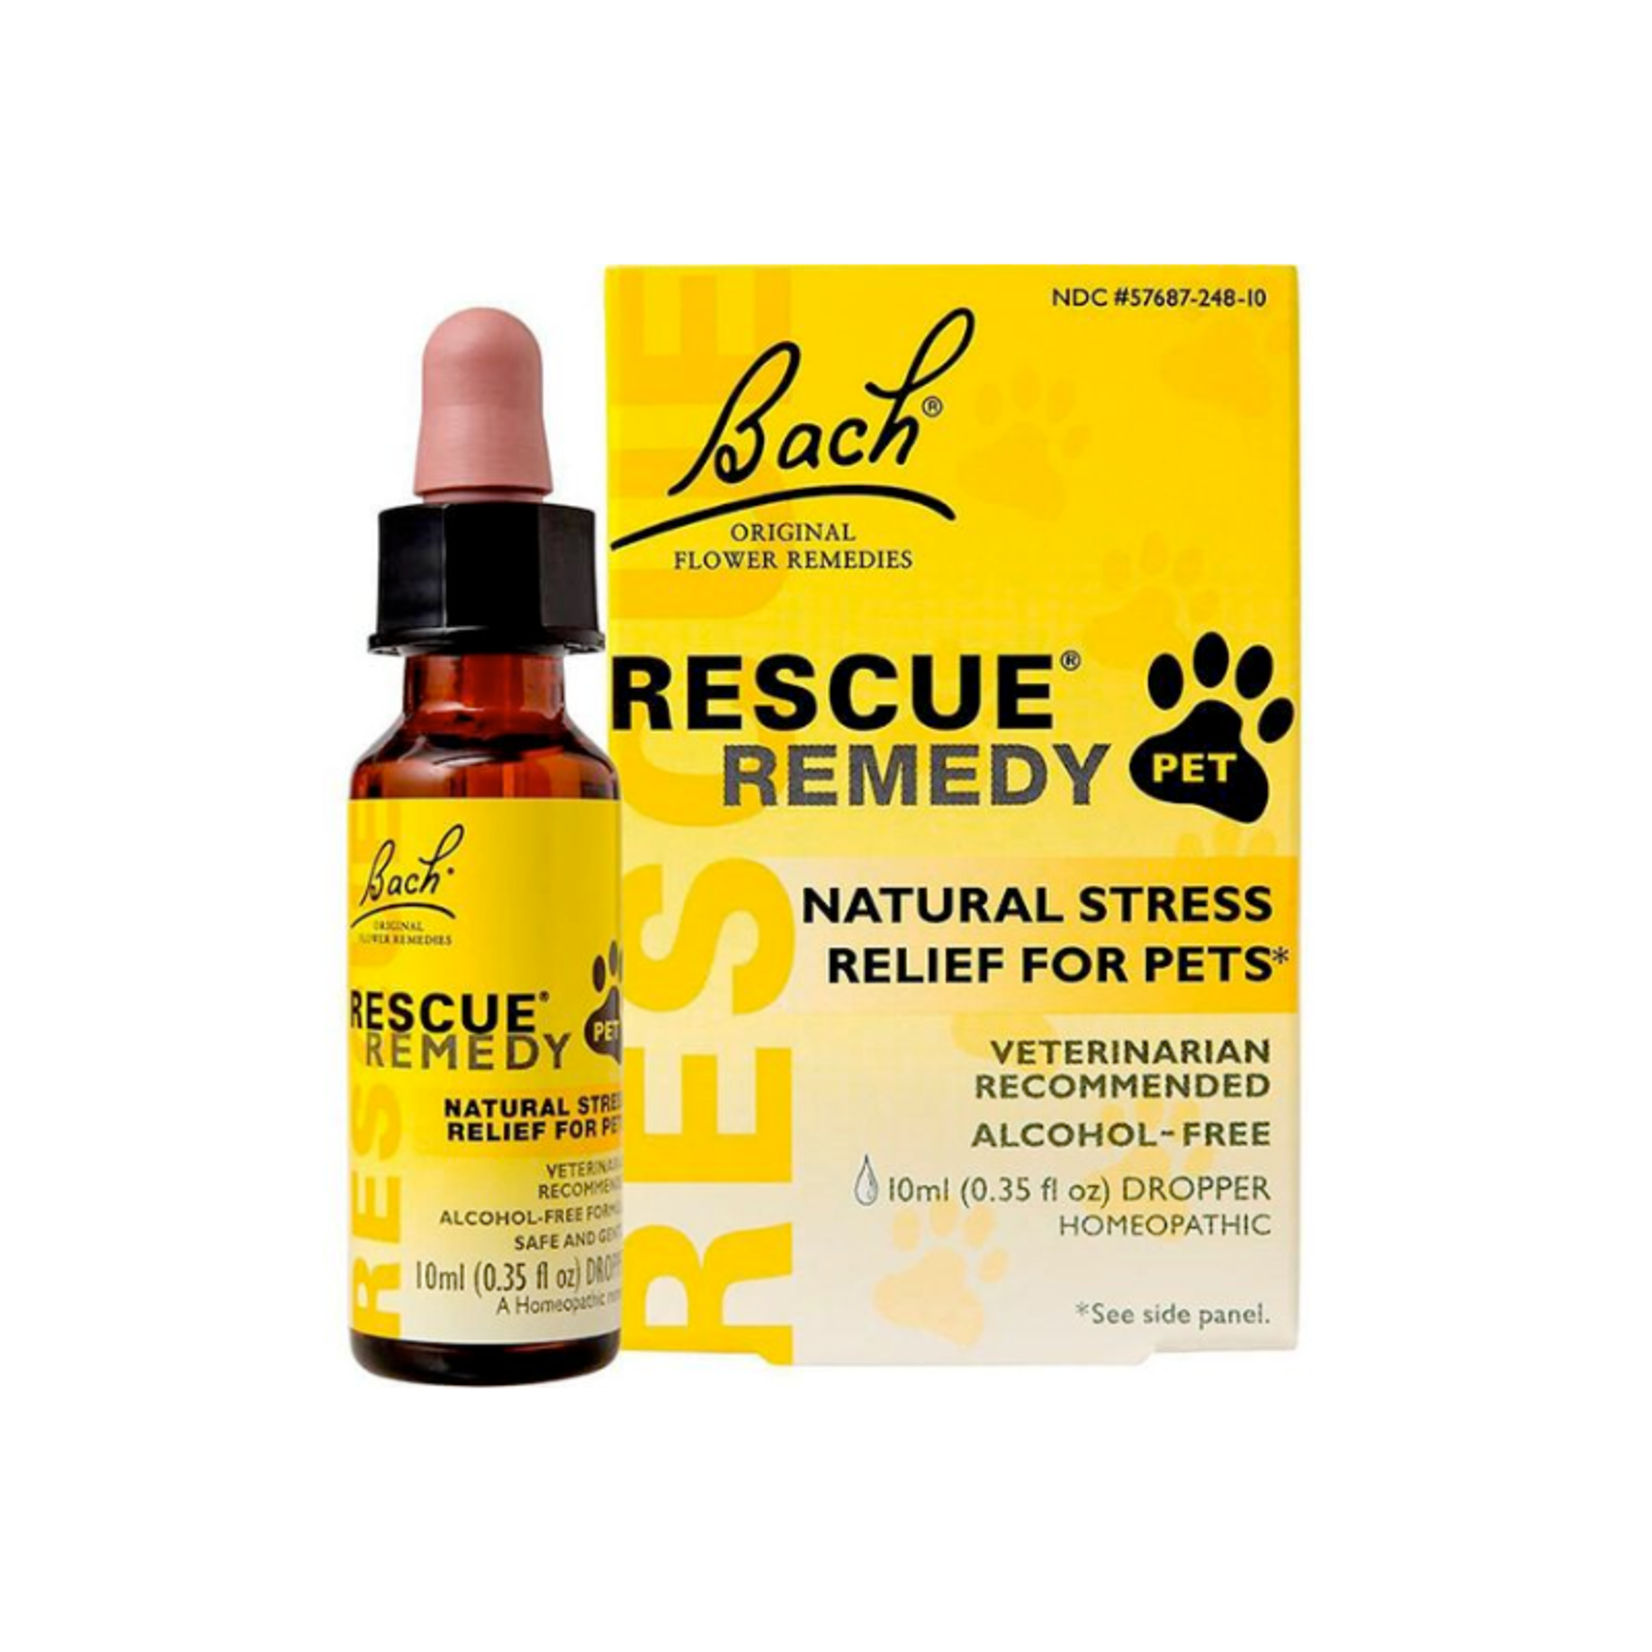 10 ml (.35 oz) - Rescue Remedy - Natural Stress Relief for Pets - Bach Original Flower Remedies